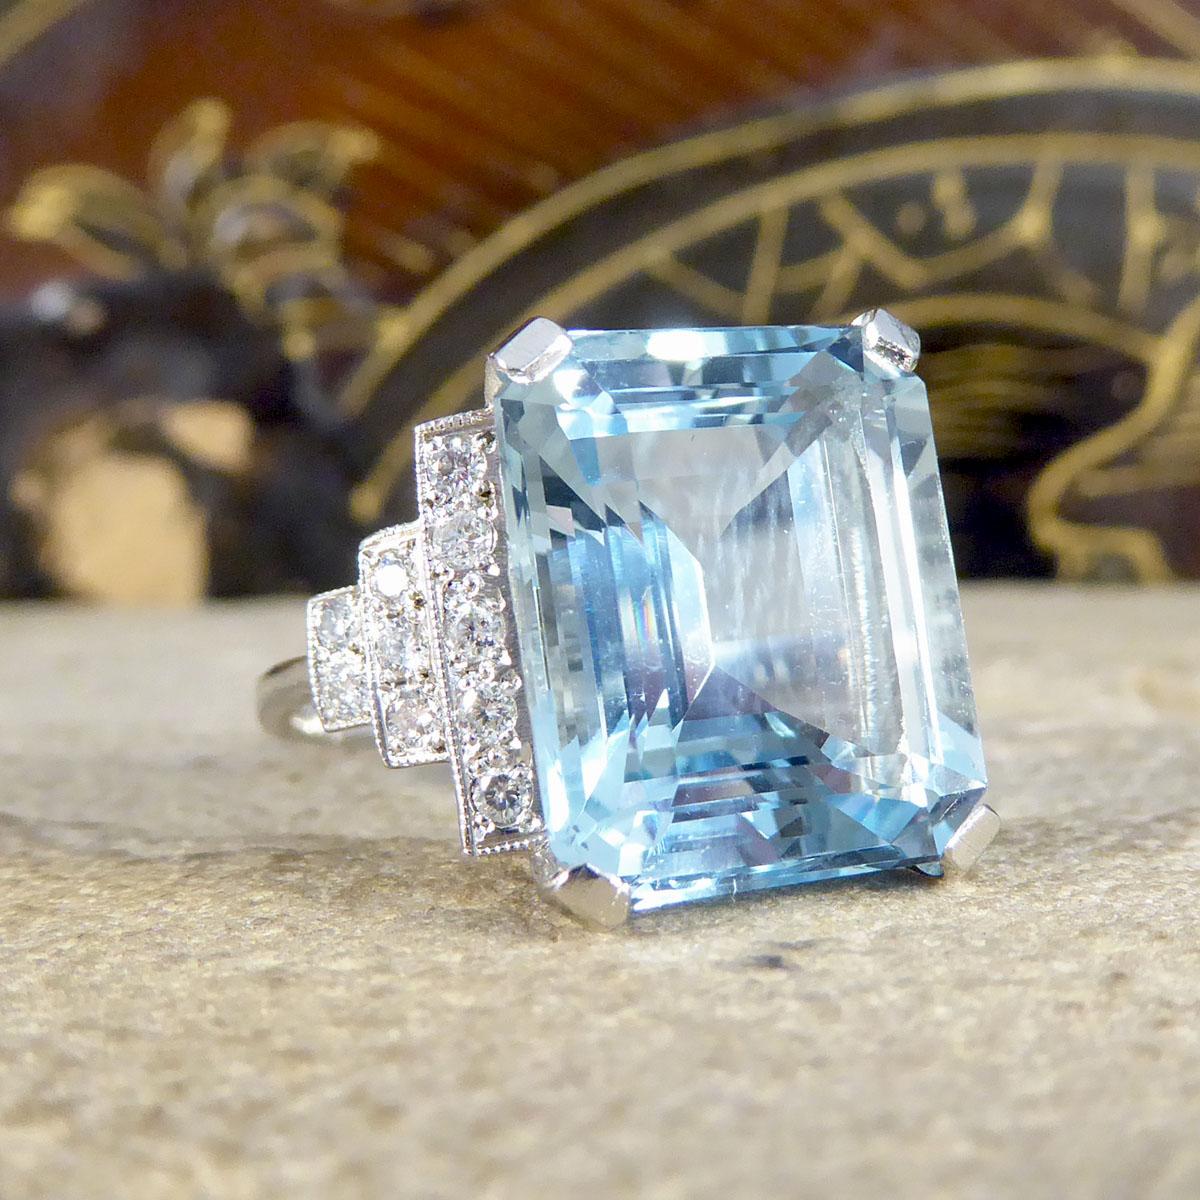 This absolutely stunning ring features a mesmerising 9.15ct bright and beautiful Emerald Cut Aquamarine. On either shoulder sit a horizontal pyramid of brilliant cut Diamonds, closest to the Aqua are five stone, down to three then two Diamonds